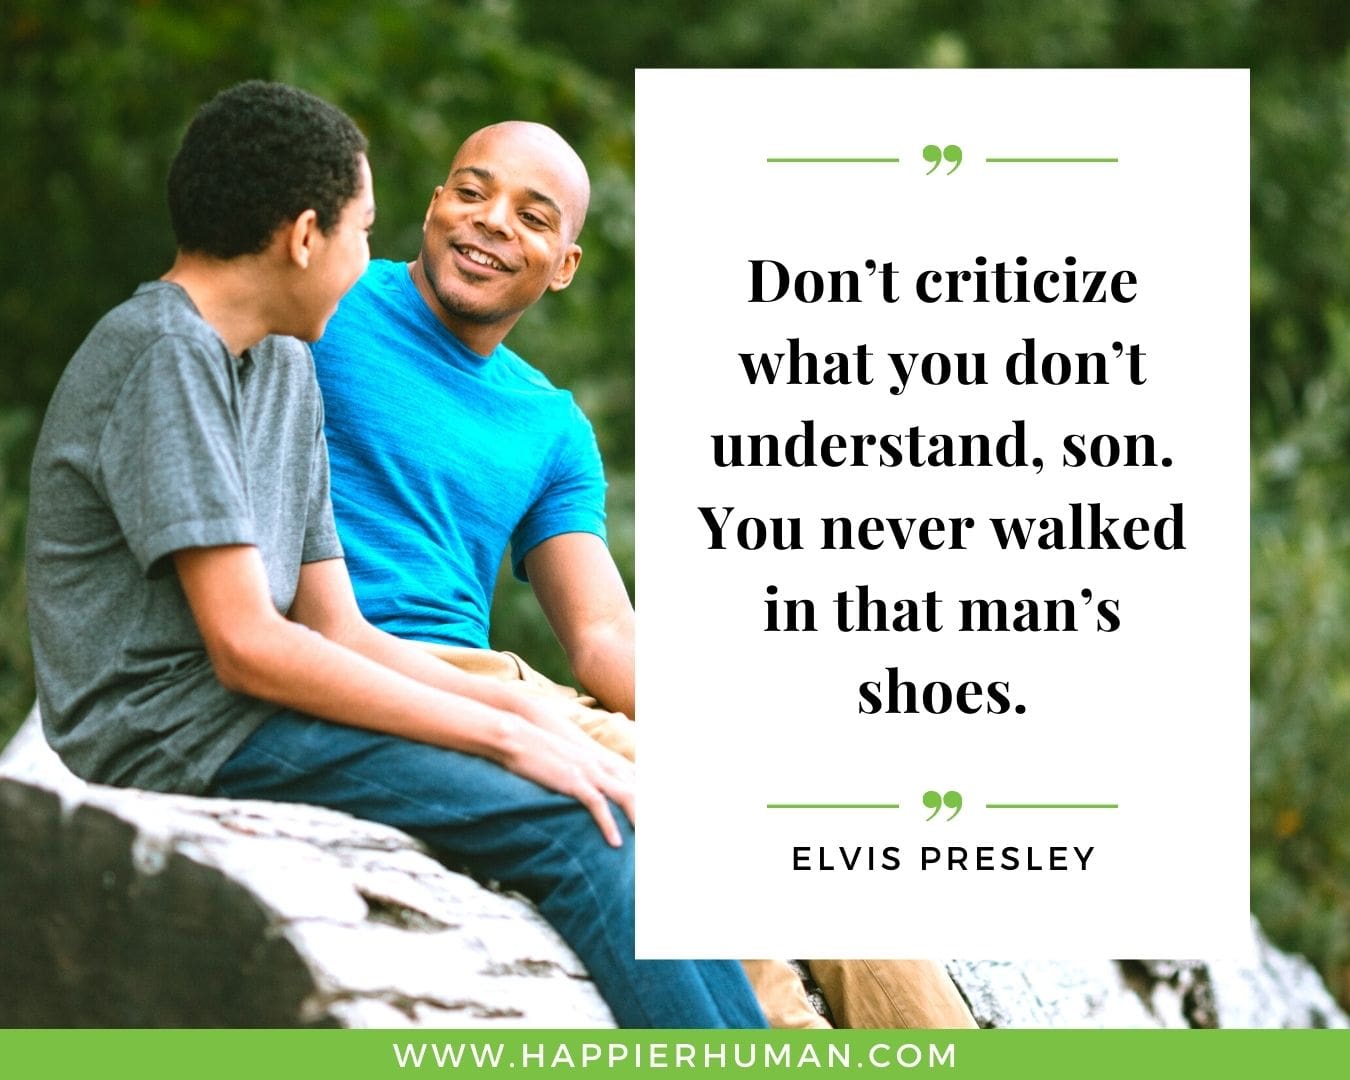 Haters Quotes - “Don’t criticize what you don’t understand, son. You never walked in that man’s shoes.“ - Elvis Presley